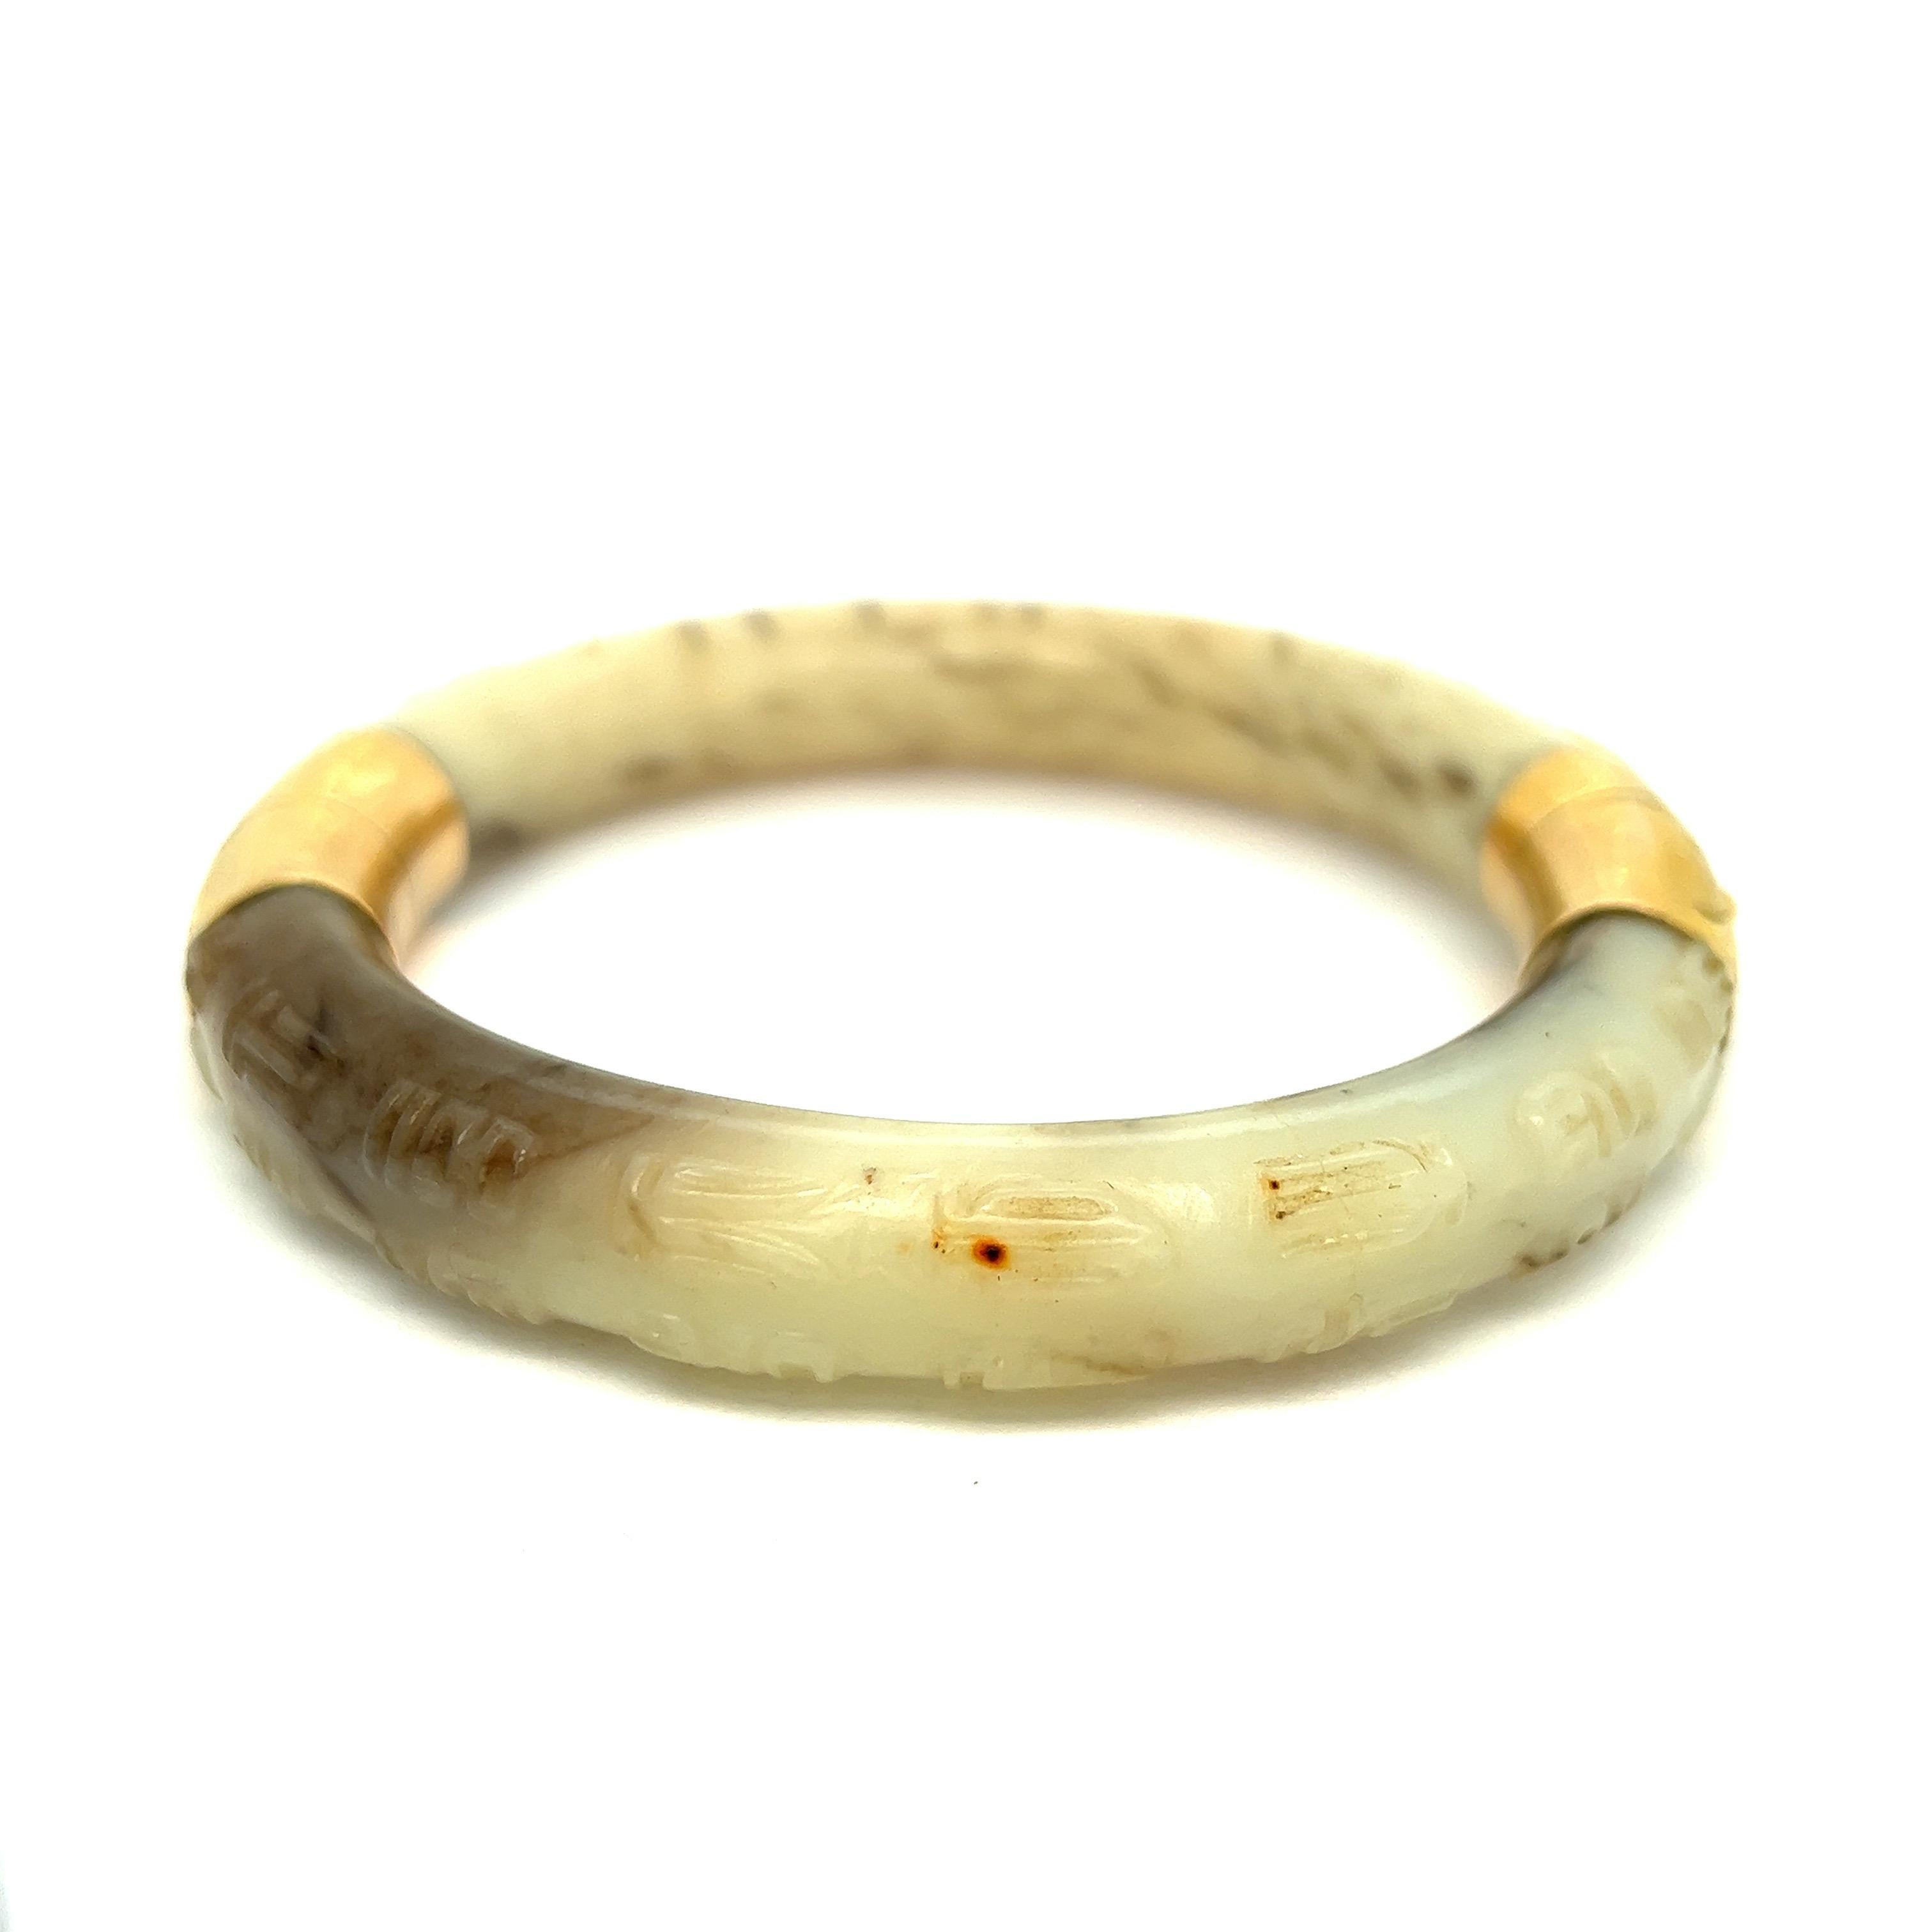 Cartier antique gold jade bangle bracelet, circa 1930s

18 karat yellow gold, white and black jade; marked Cartier, 18k, 750, 56048

Size: inner diameter 2.5 inches, inner circumference 8 inches
Total weight: 67.2 grams